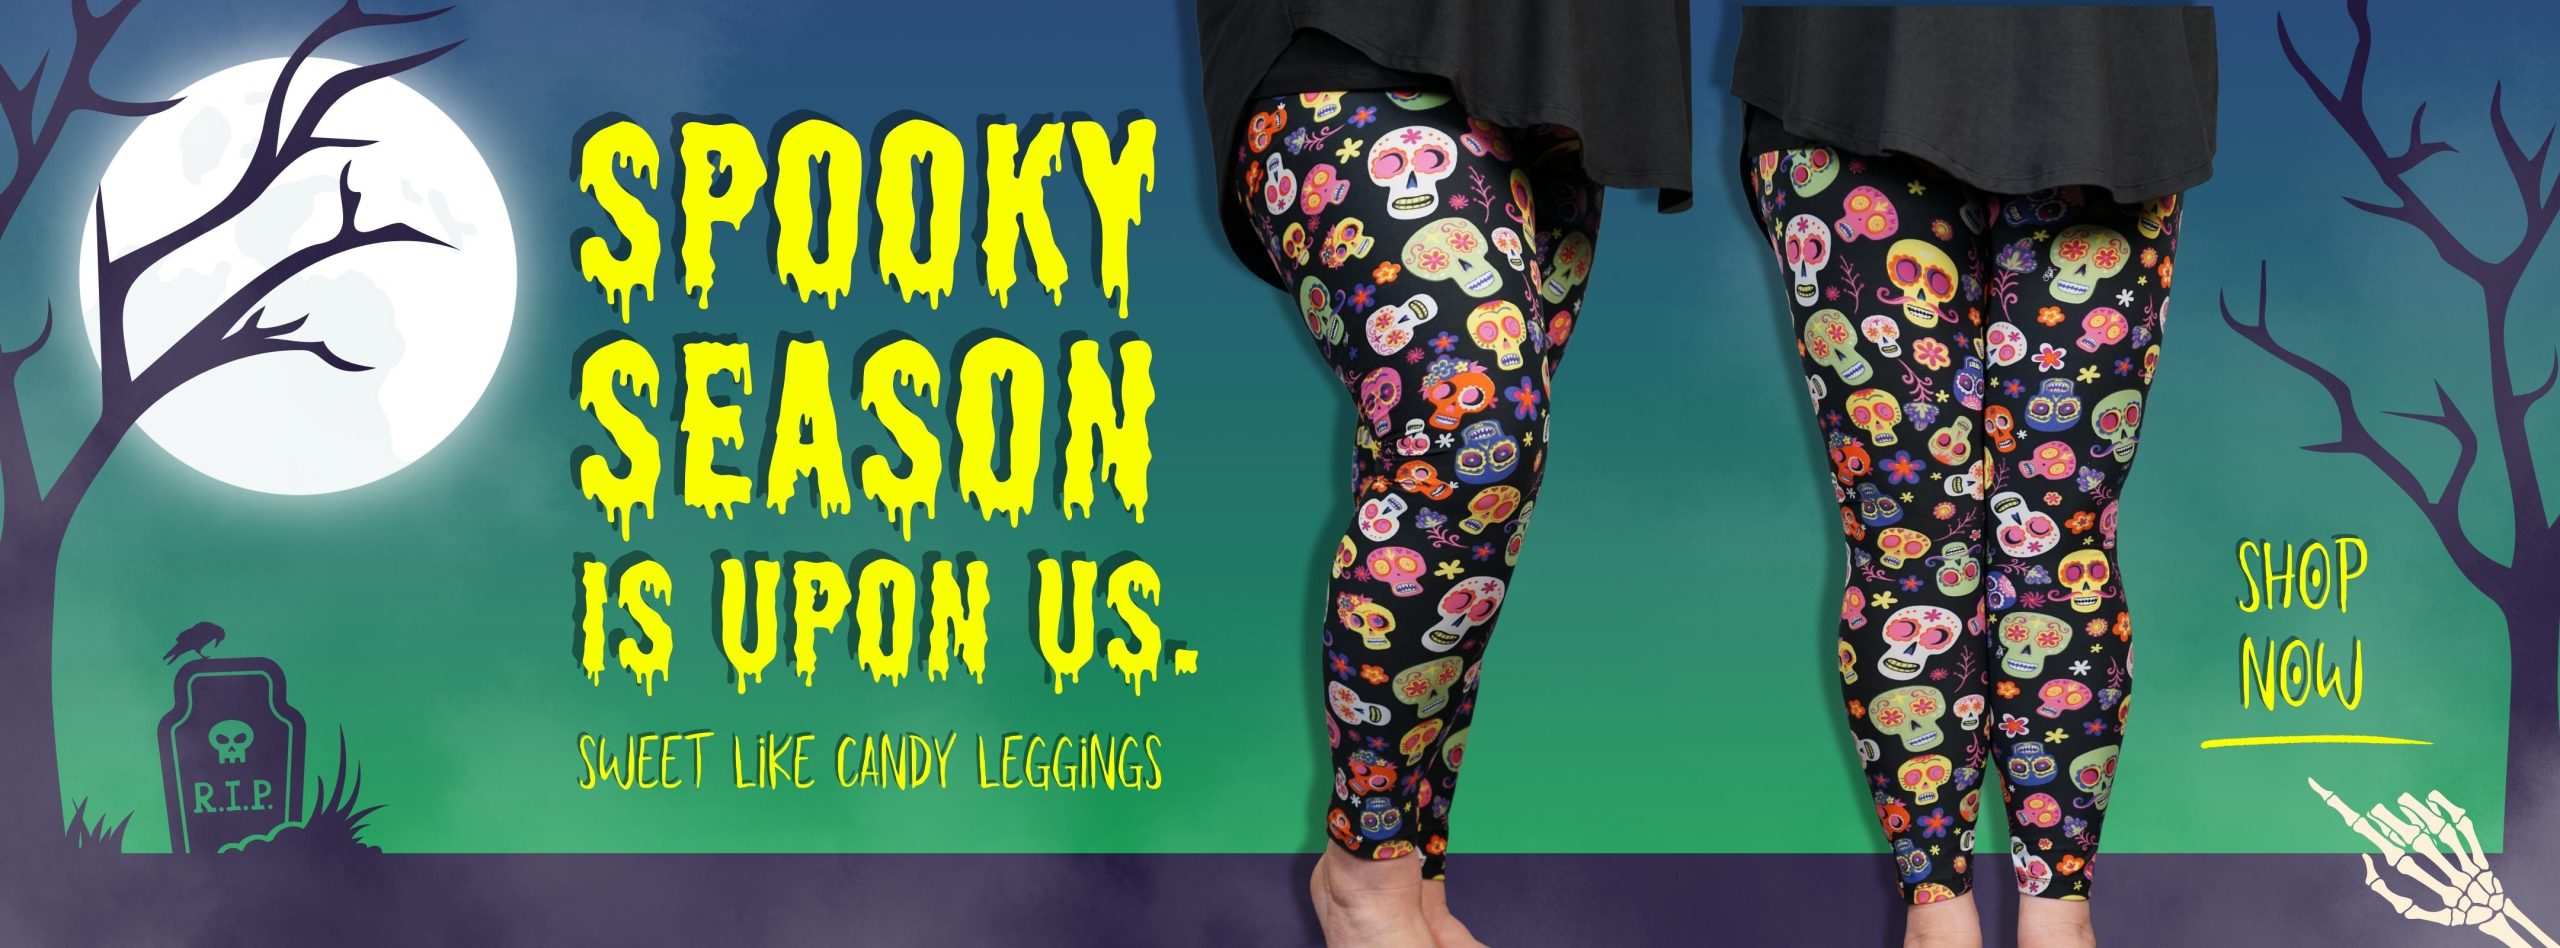 Banner that shows our new Sweet Like Candy Leggings. Text says "Spooky Season is Upon Us" and "Shop Now"